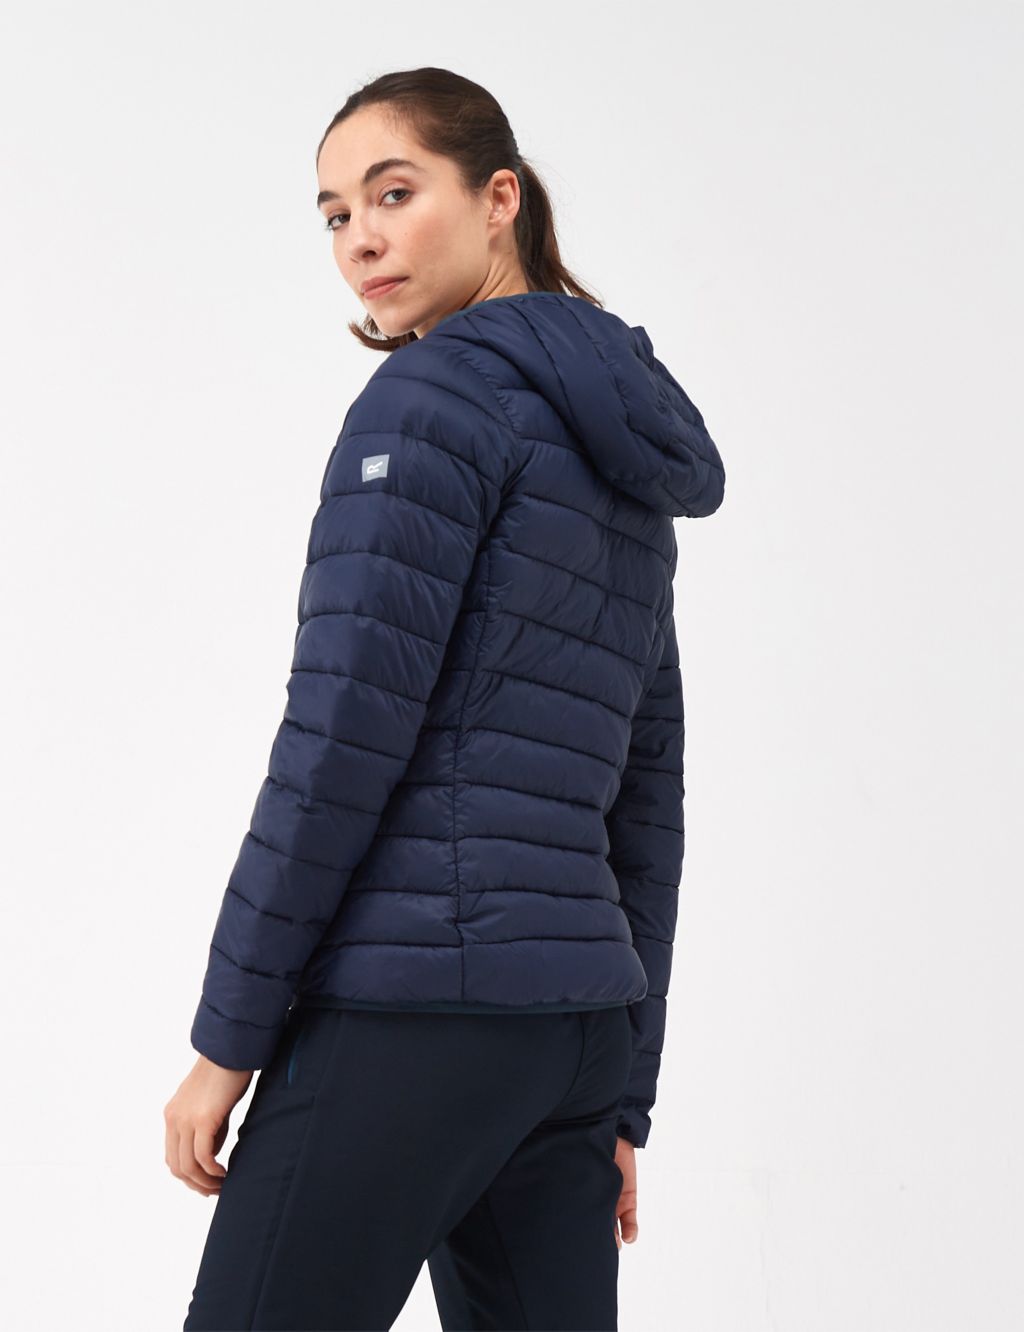 Marizion Water-Repellent Padded Jacket image 3